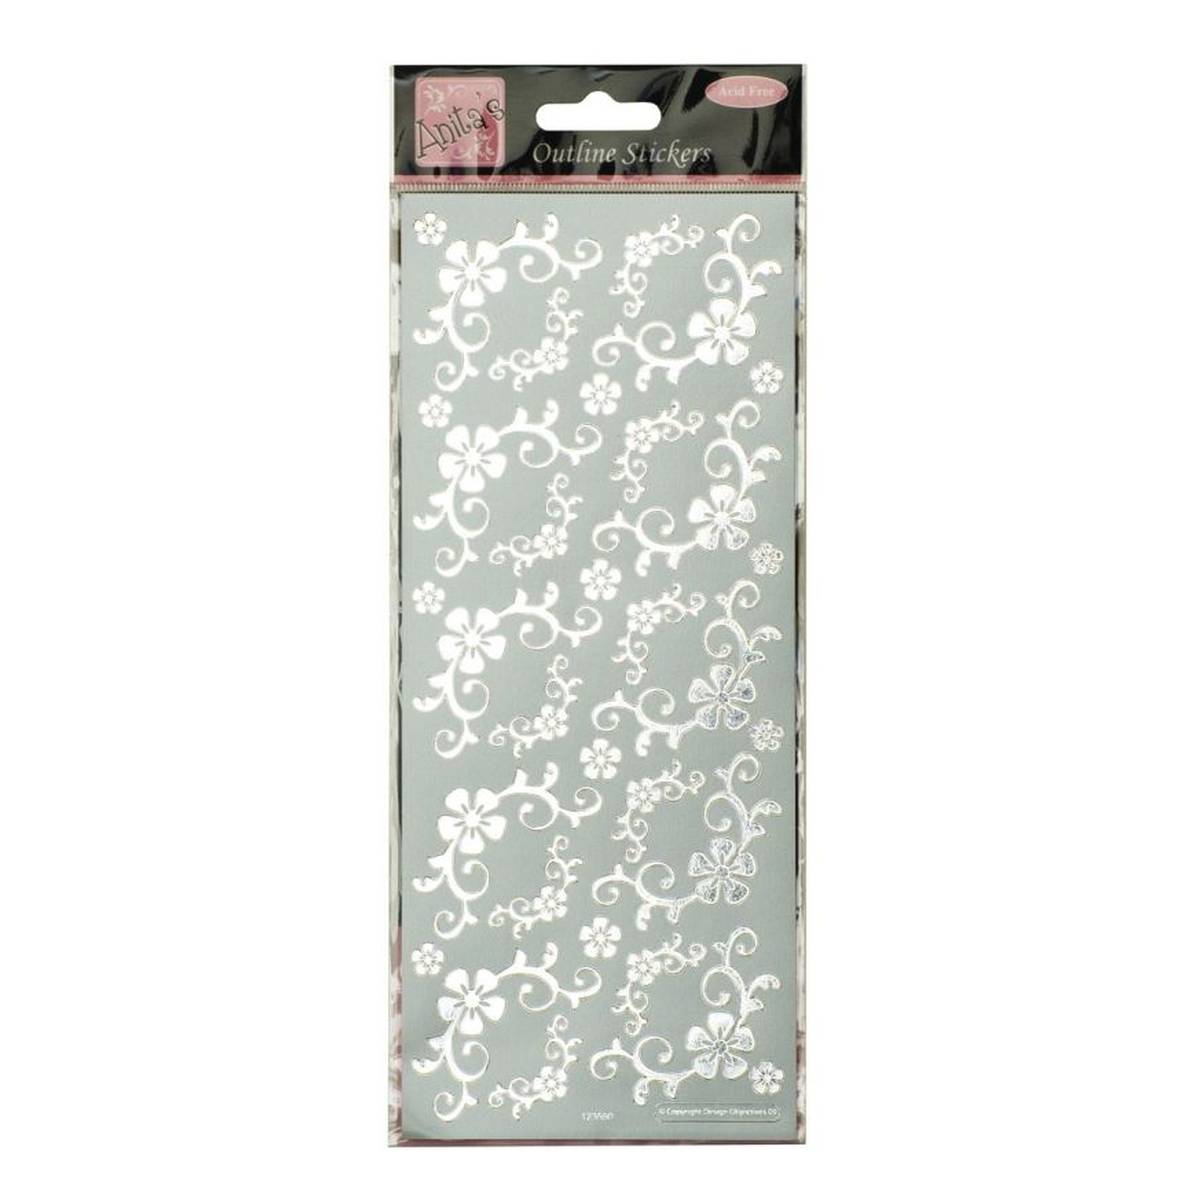 Outline Stickers Fanciful Floral Corners Silver | Hobbycraft